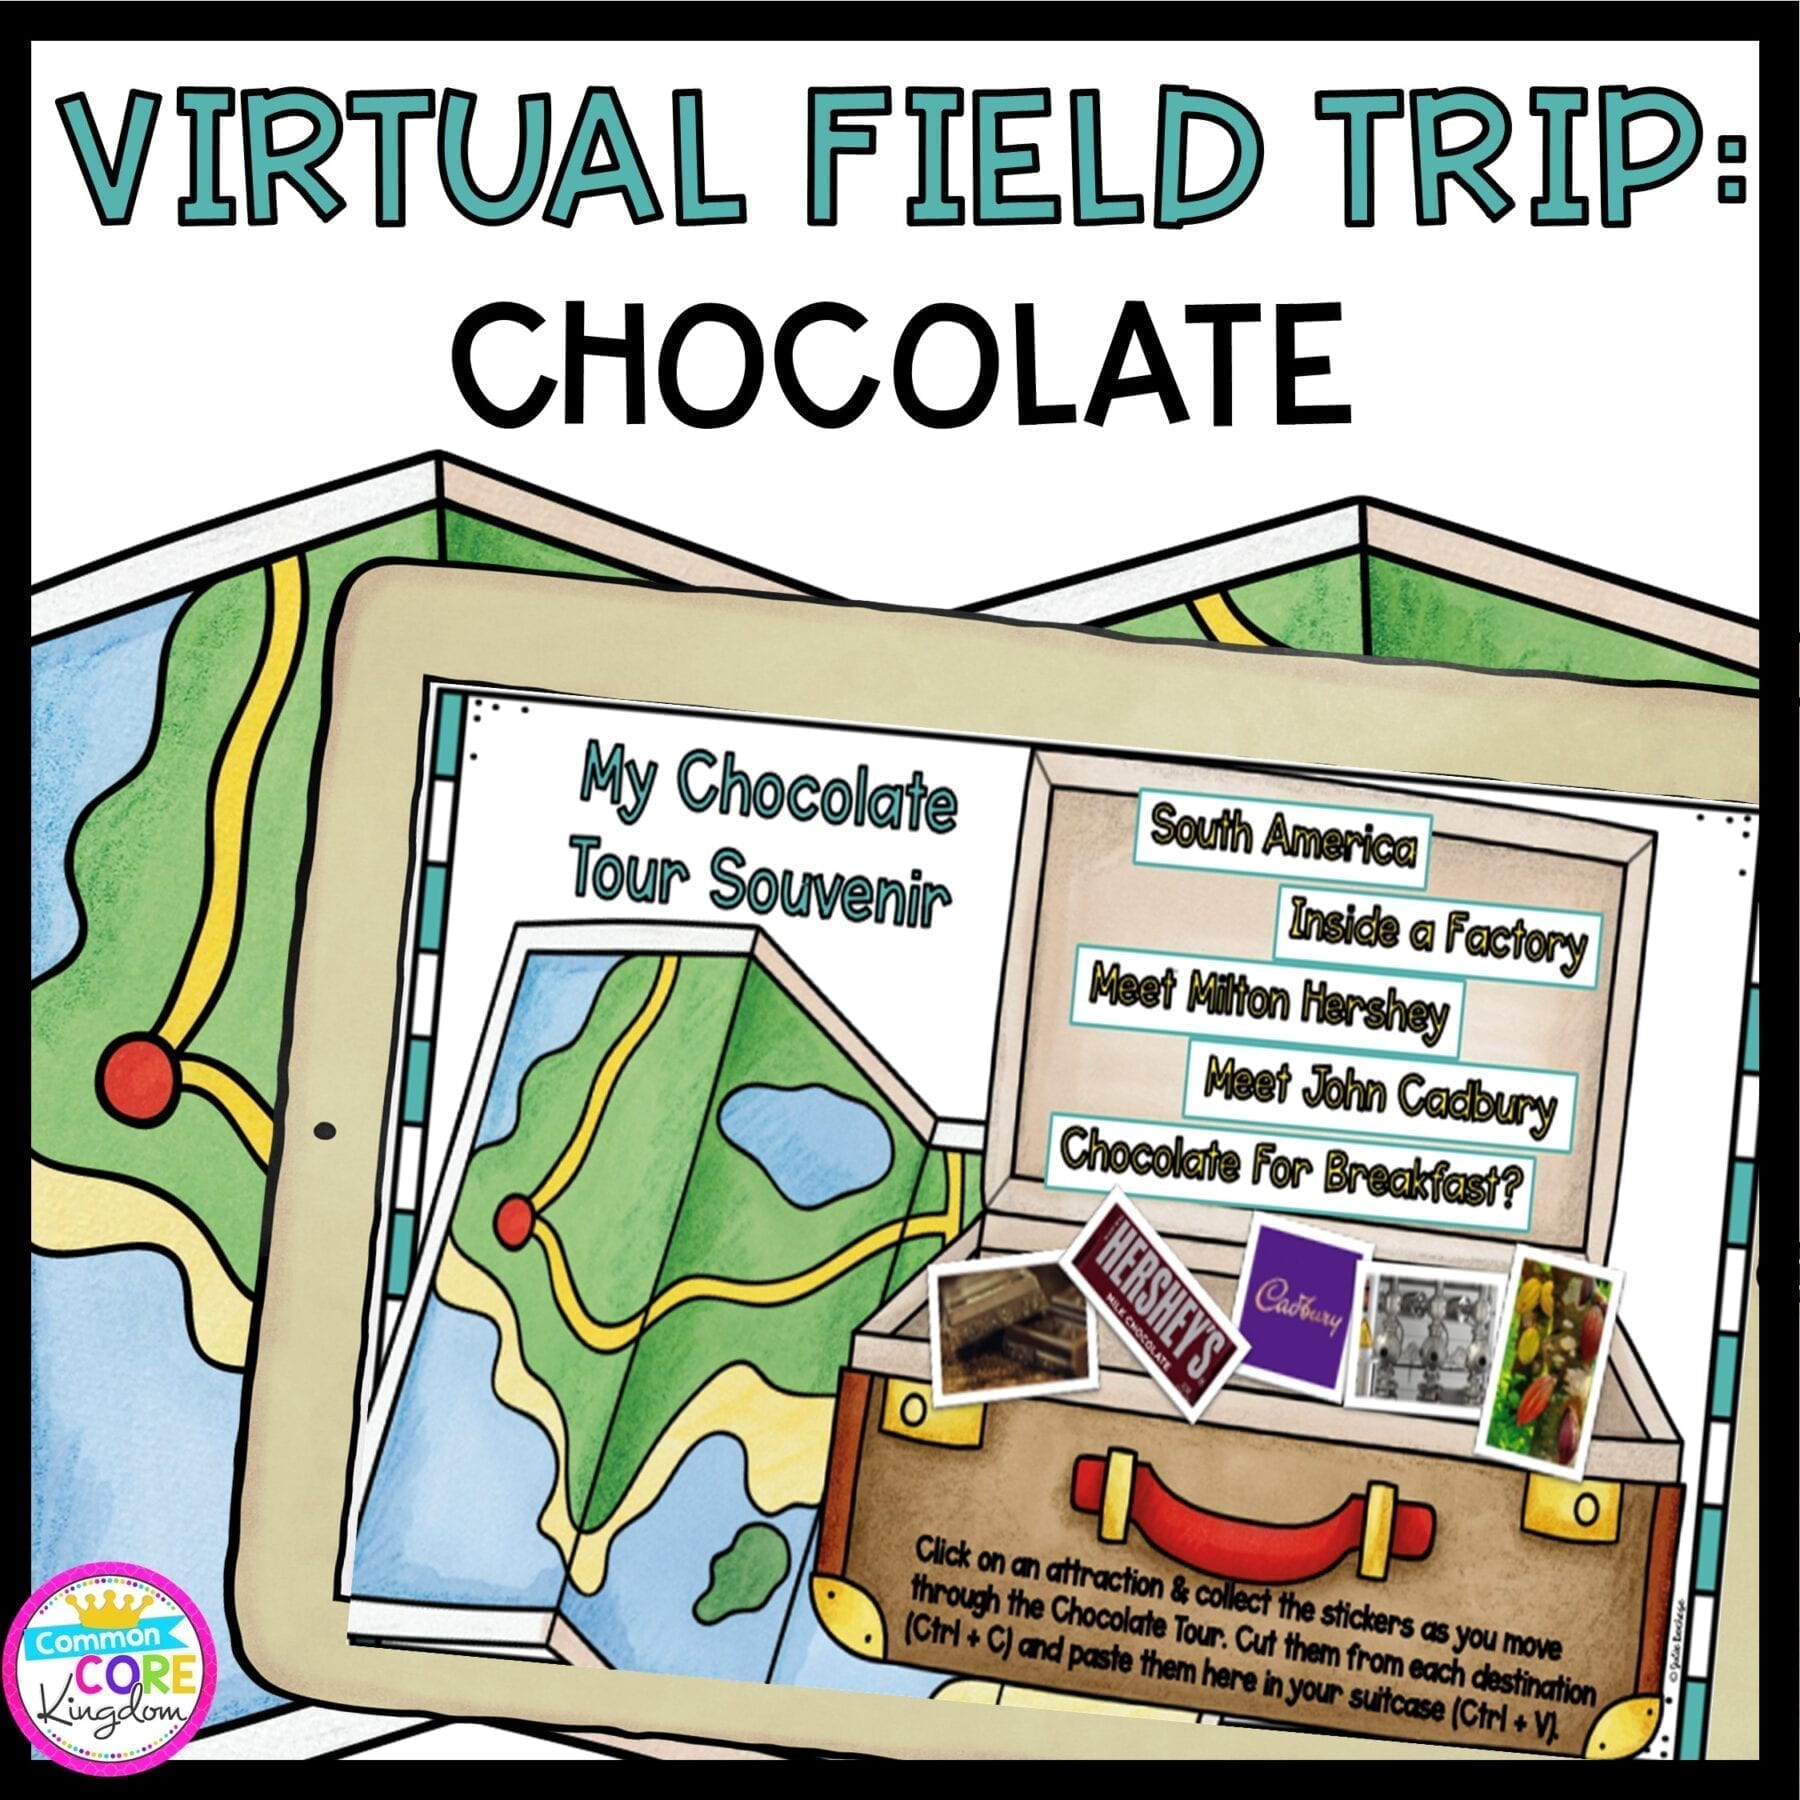 Cover for Chocolate Virtual Field Trip showing a map in the background and a suitcase for students to put their learning in.